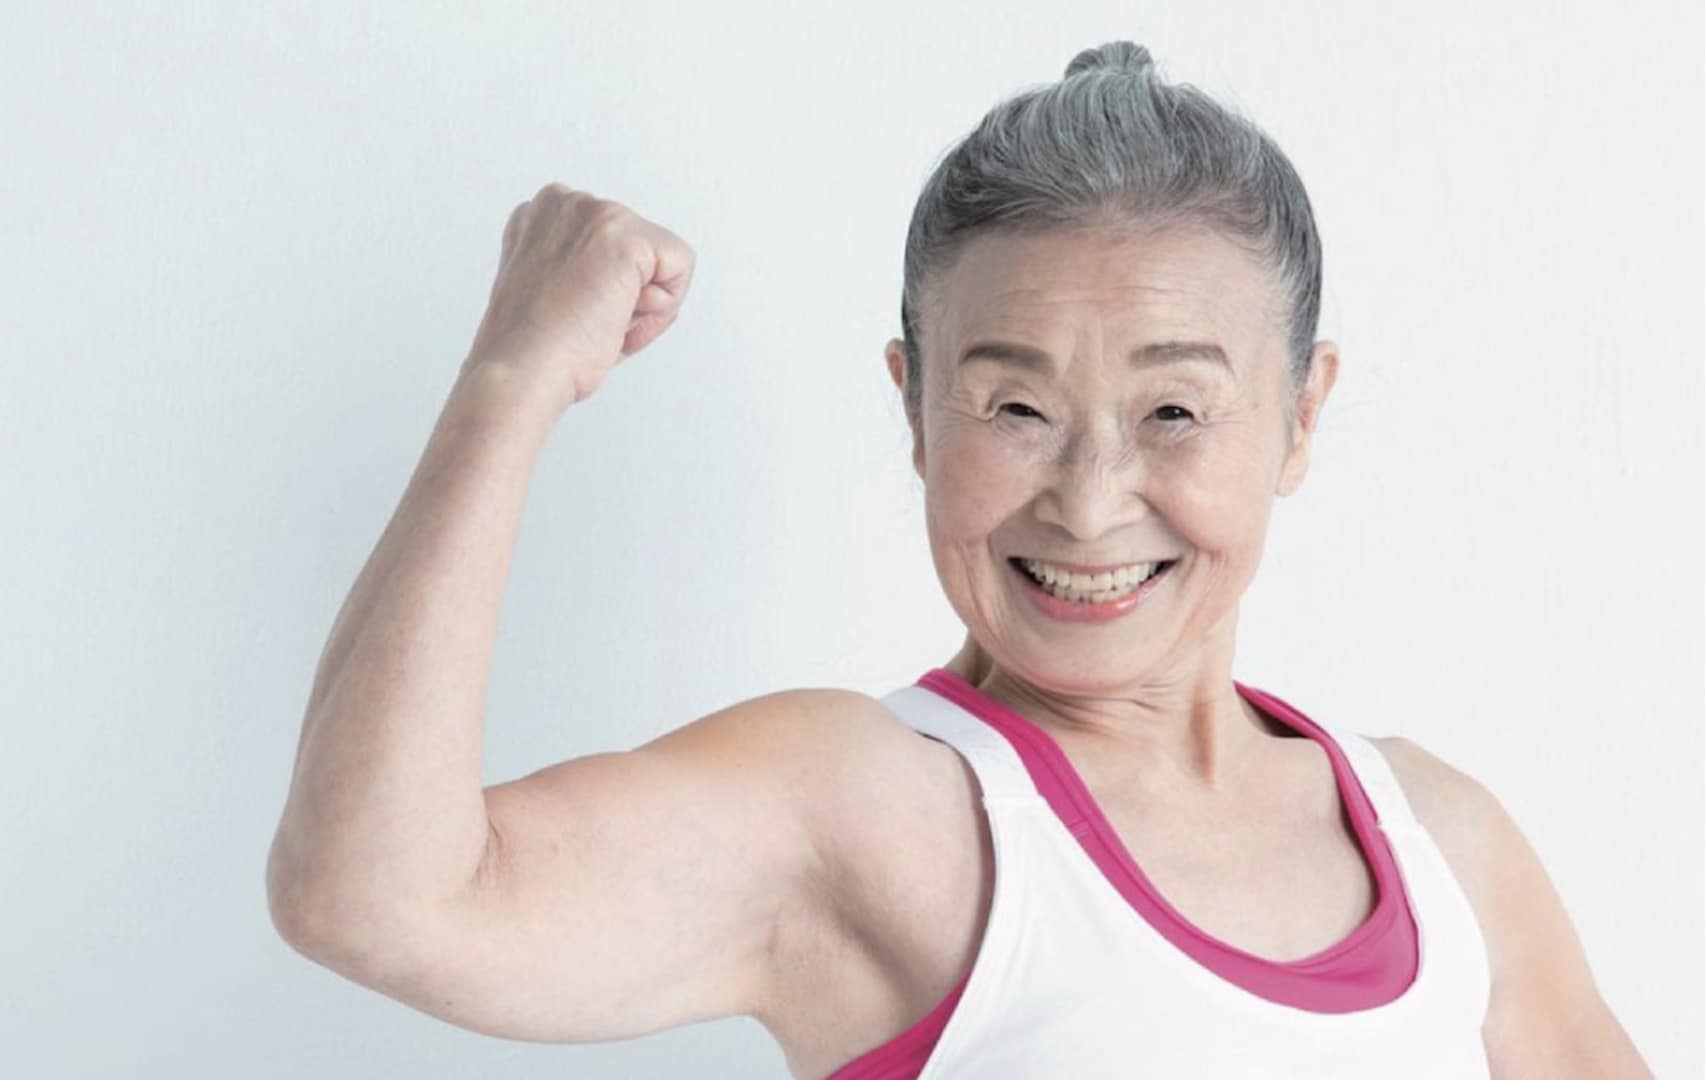 90-year-old fitness instructor shows us you’re never too old to get totally ripped